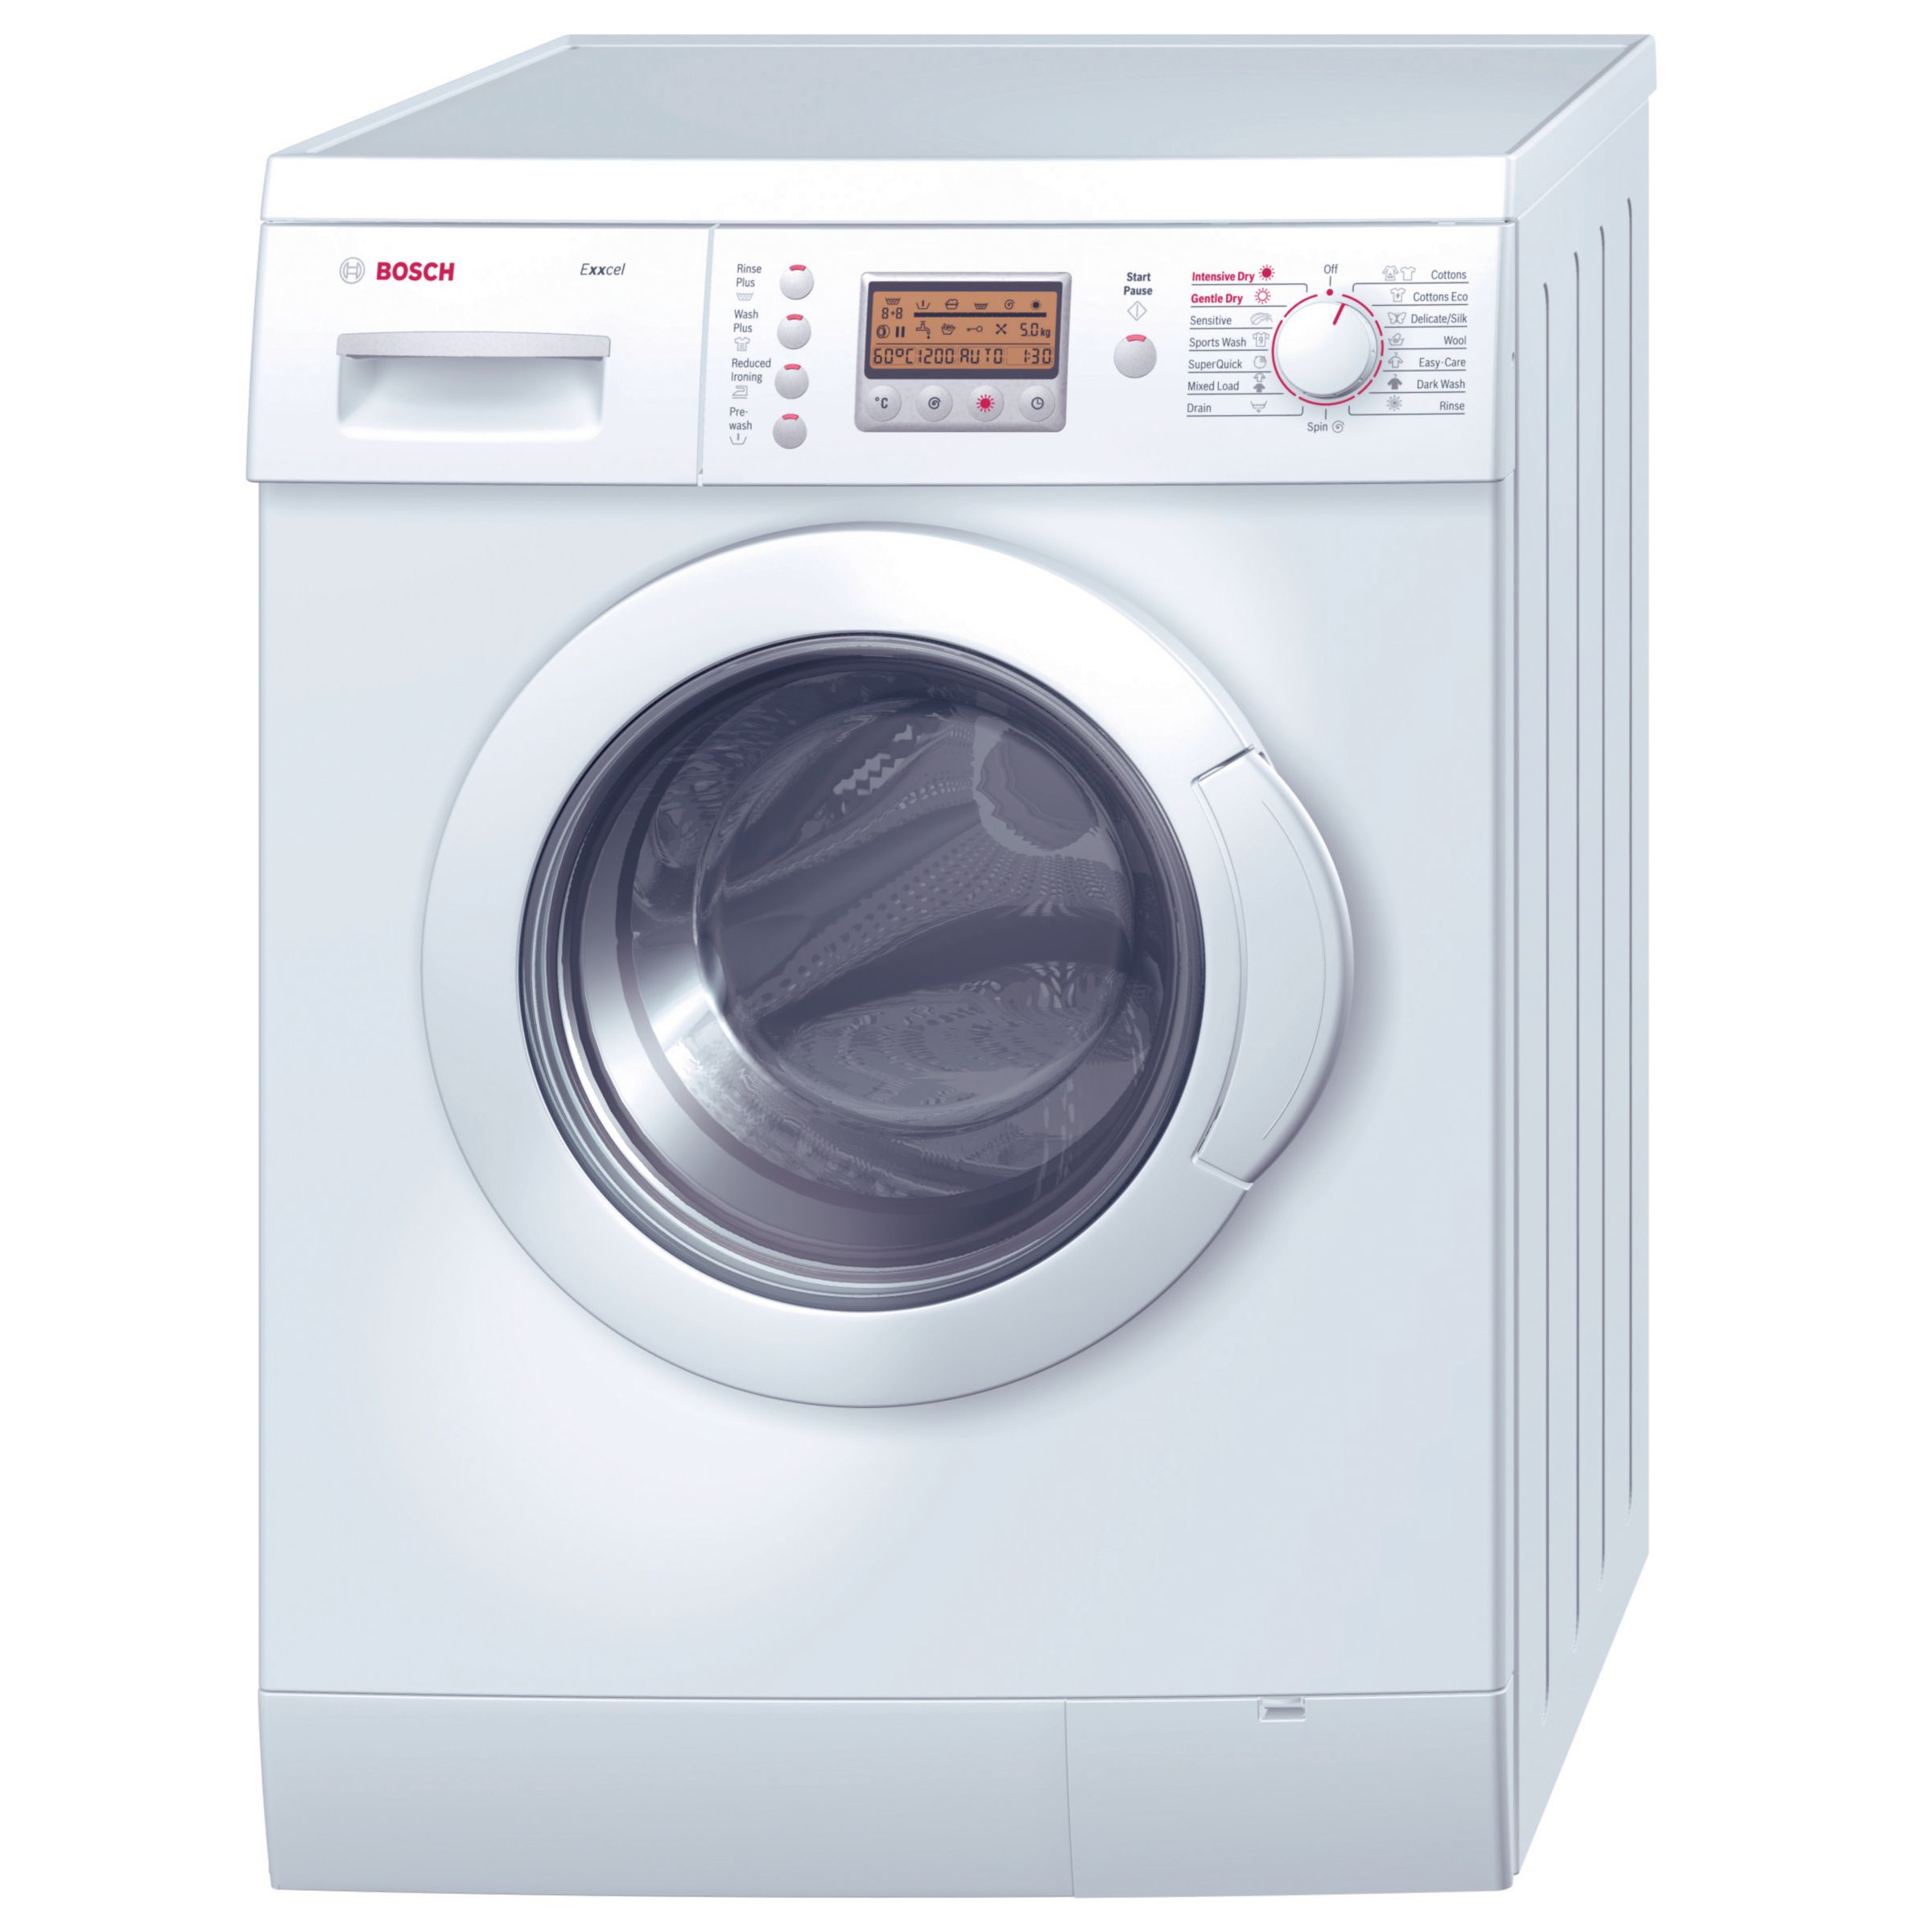 Bosch Exxcel WVD24520GB Washer Dryer, White at John Lewis